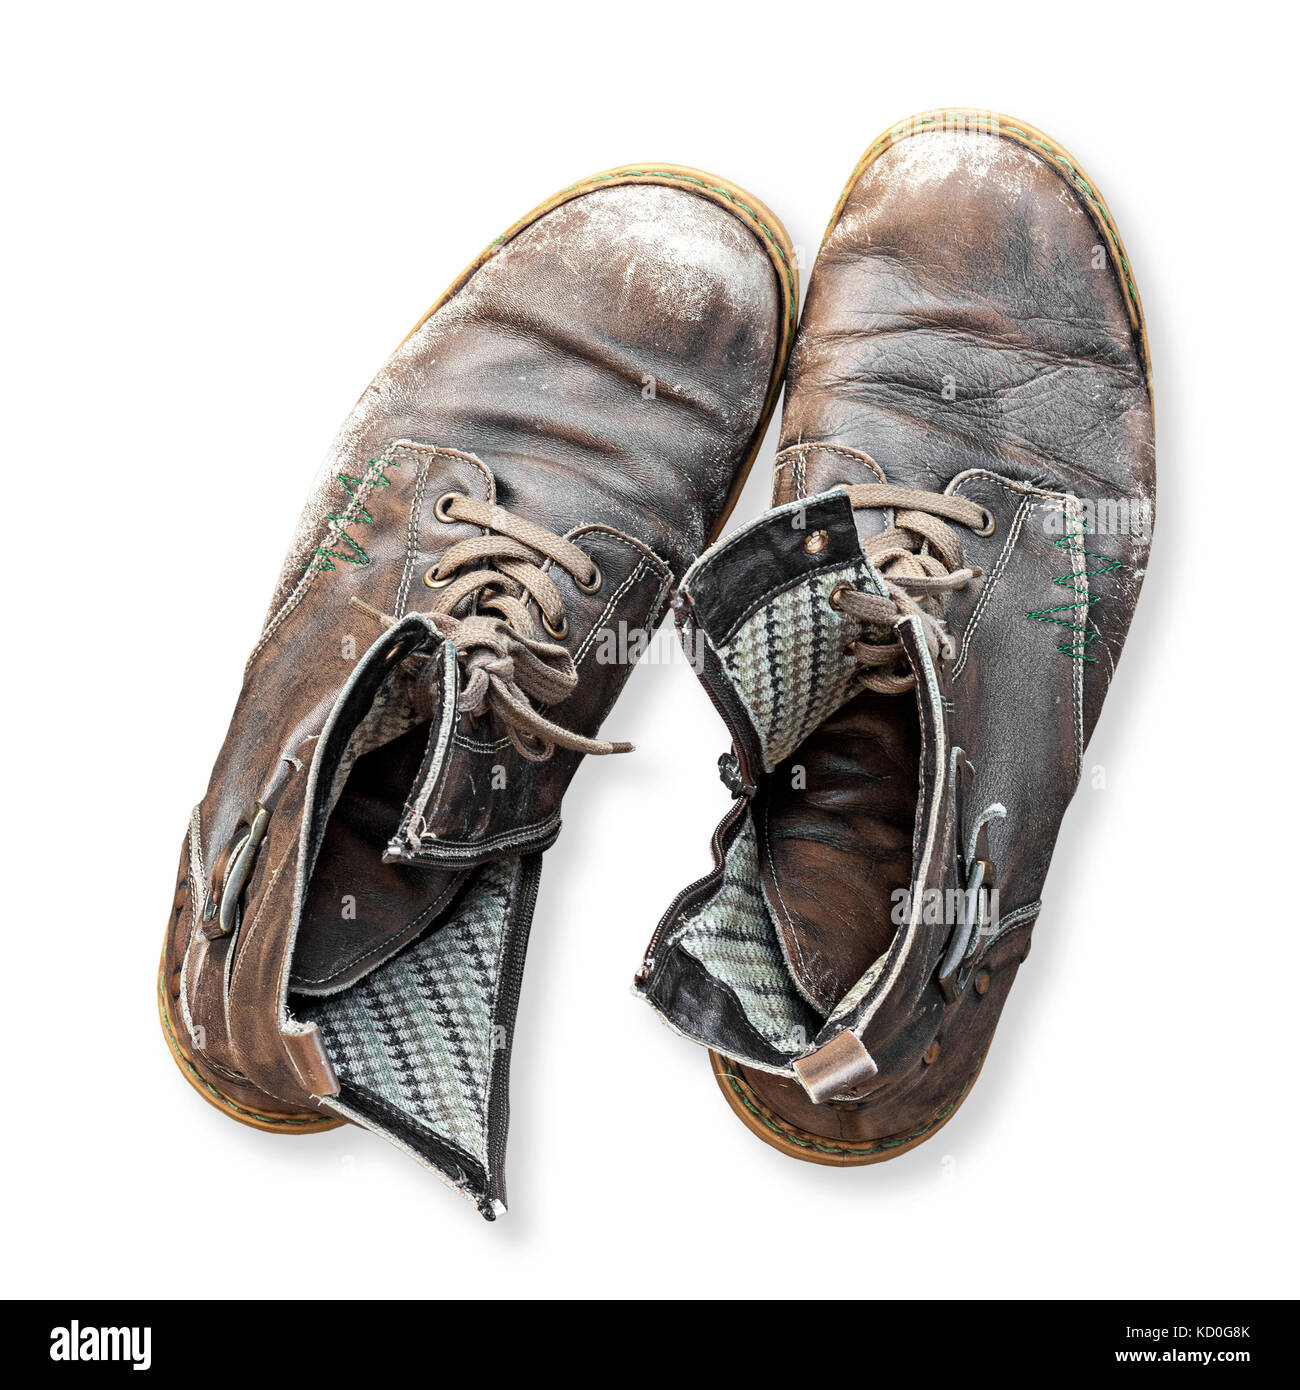 Pair of old used worn out boots isolated on white background. High angle overhead view Stock Photo